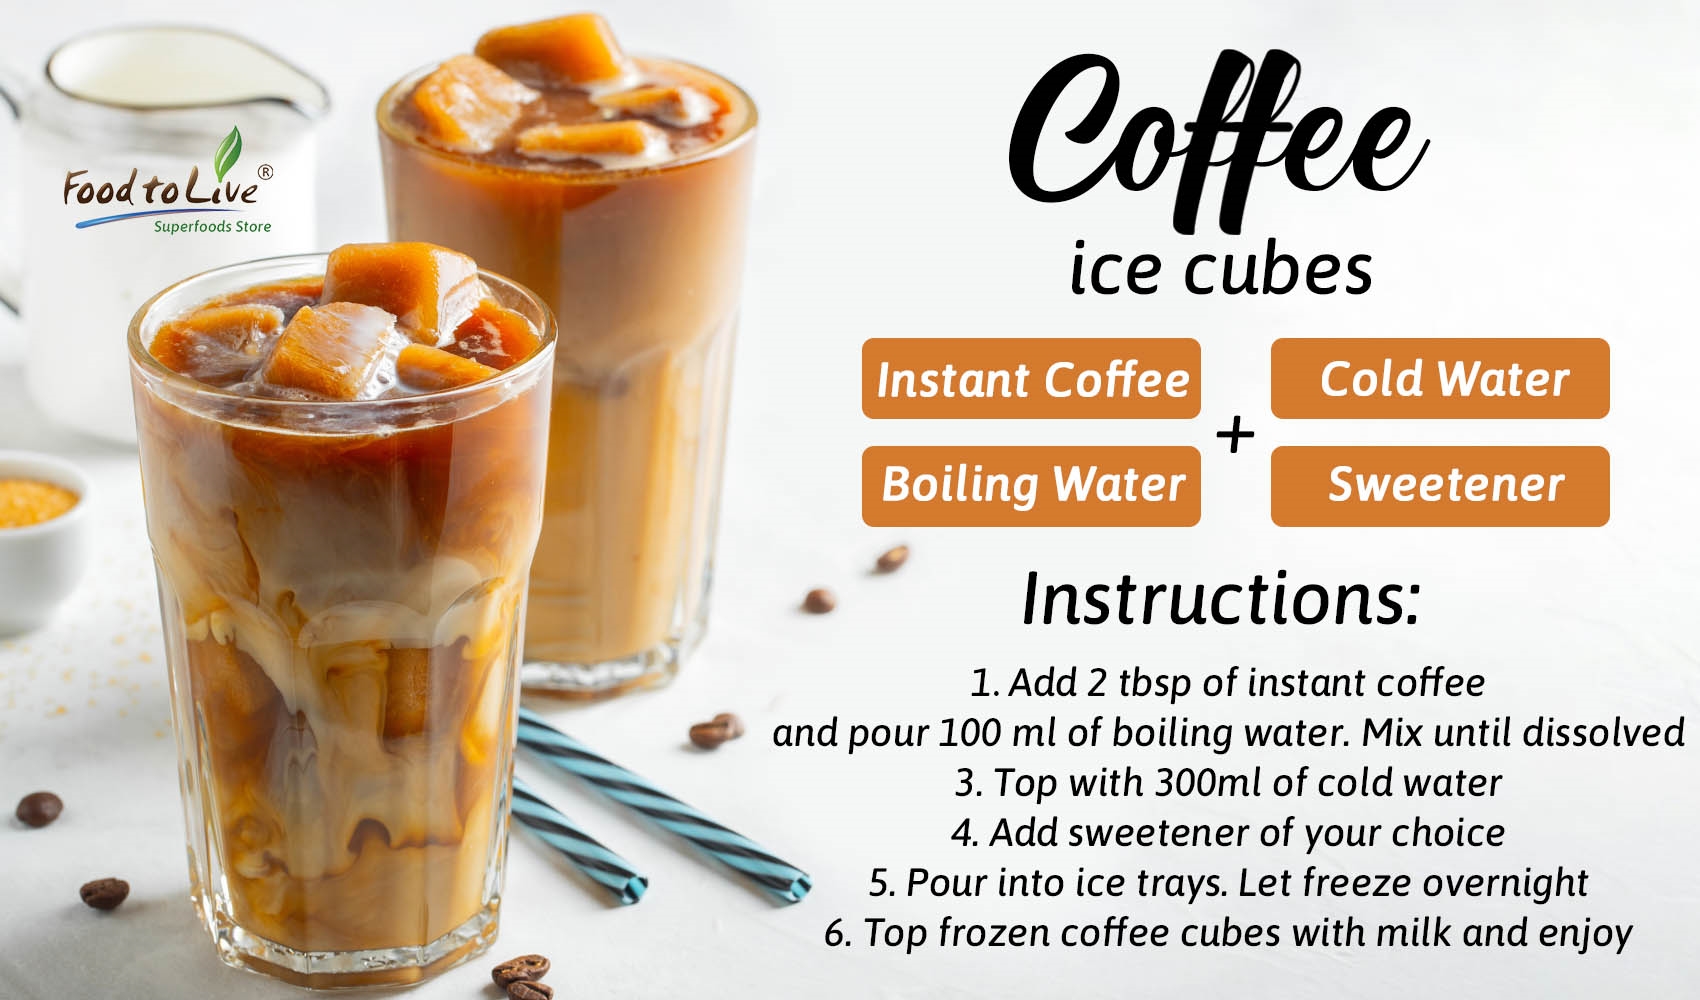 https://foodtolive.com/healthy-blog/wp-content/uploads/sites/3/2022/10/coffee-ice-cubes.jpg